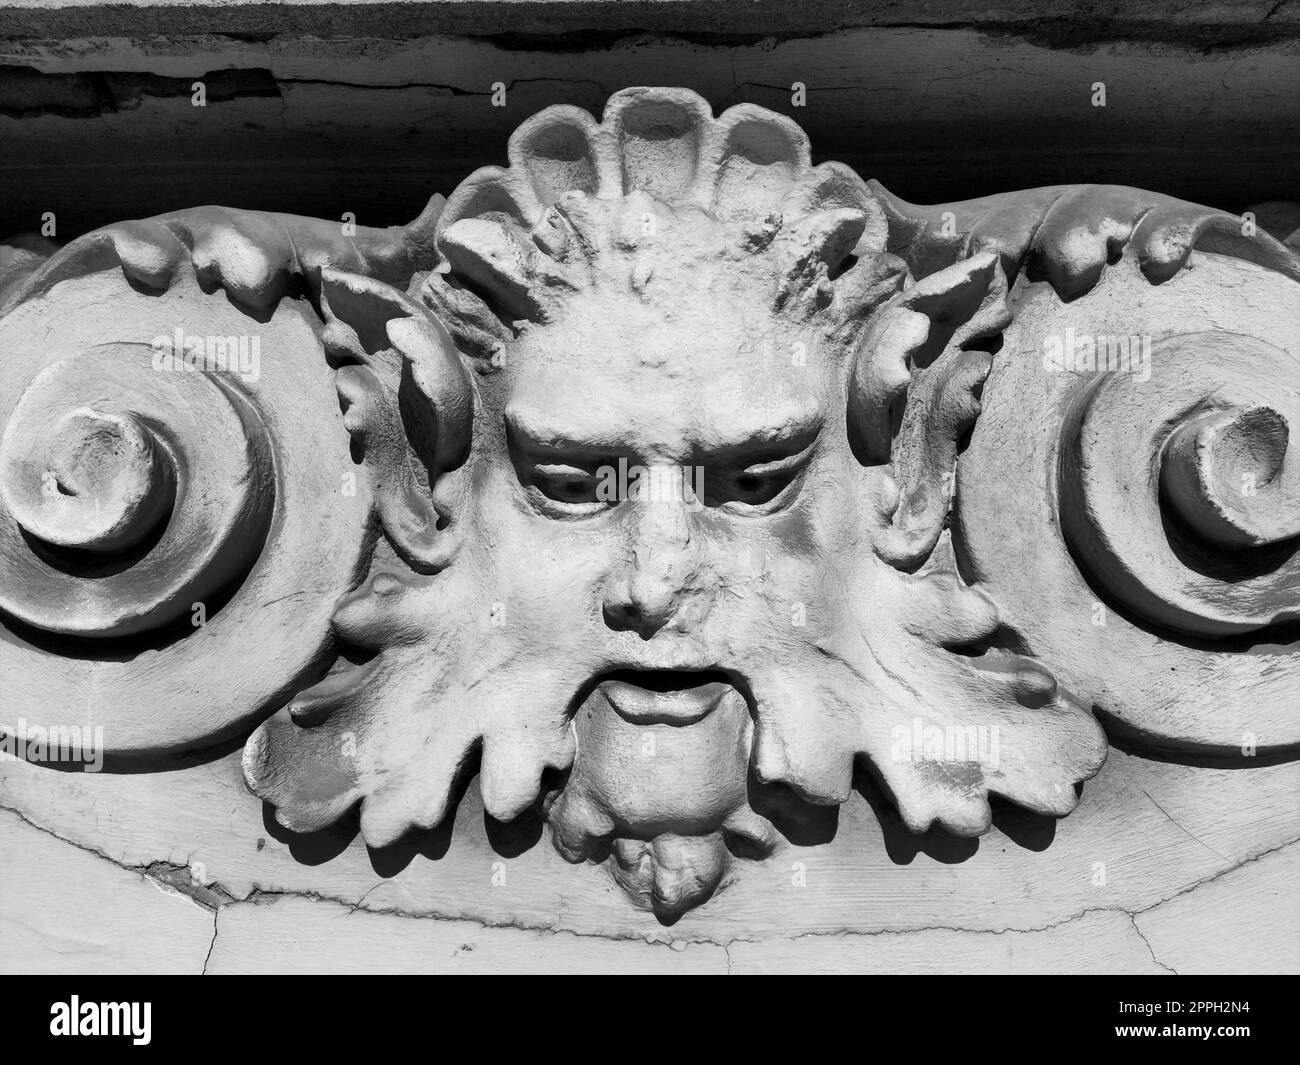 Decorative detail on the facade. Relief on the facade of a building. Stucco molding in the form of a man's head with curly hair, mustache and curls on the sides. High relief concrete bas-relief. Stock Photo